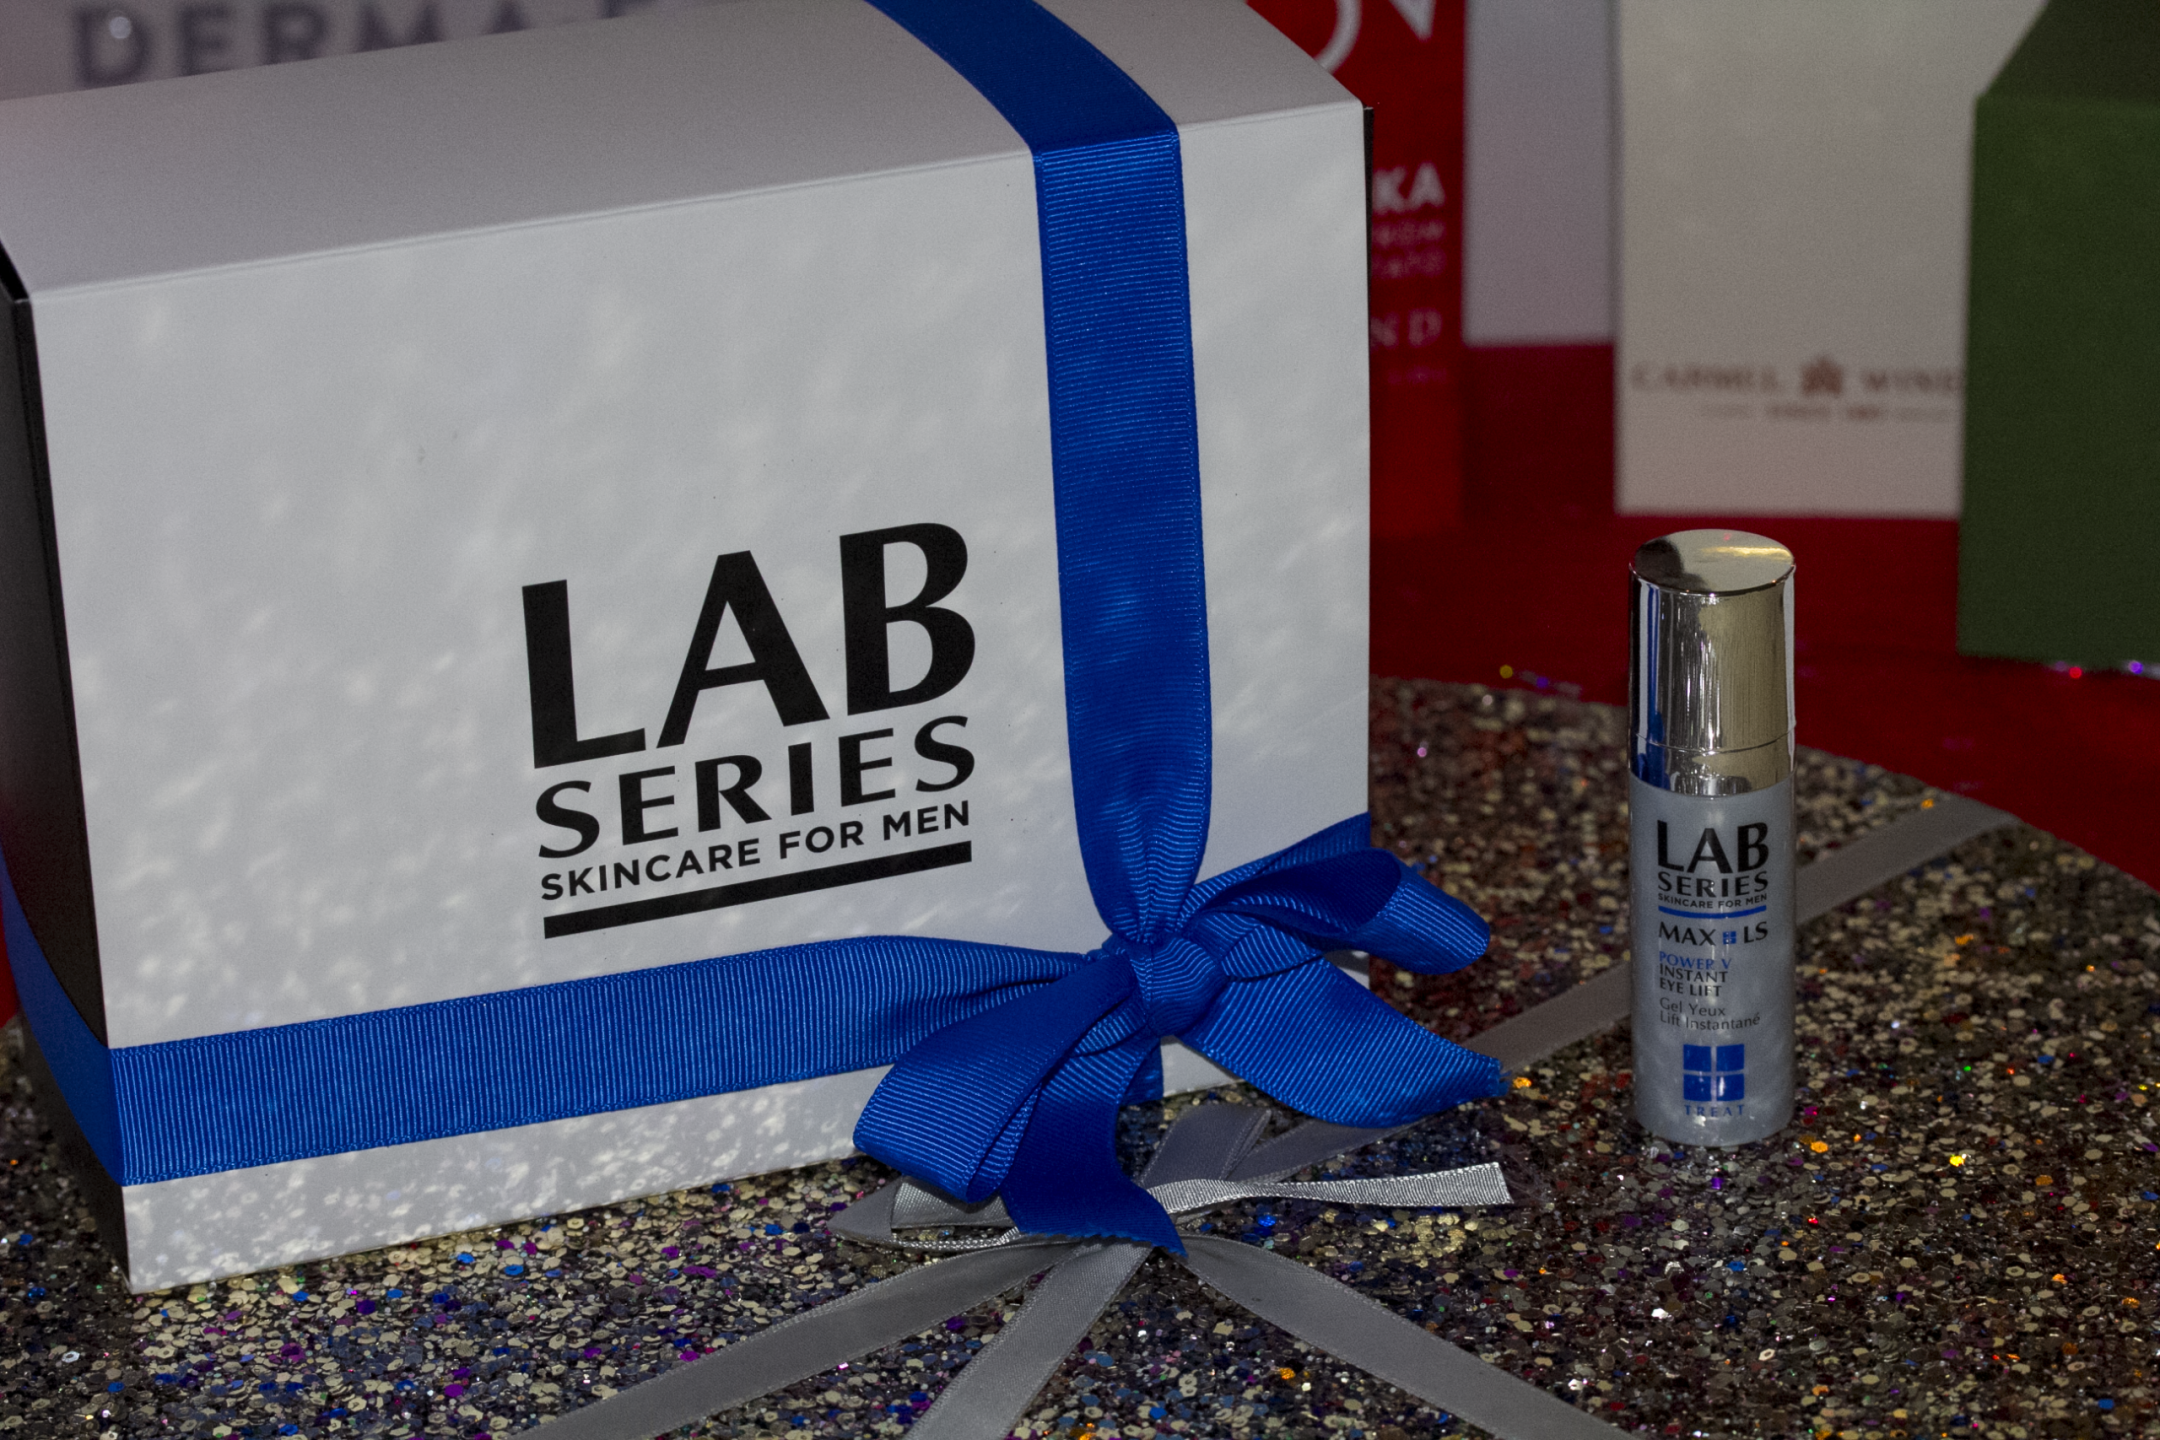 LAB Series skincare for men holiday gift guide